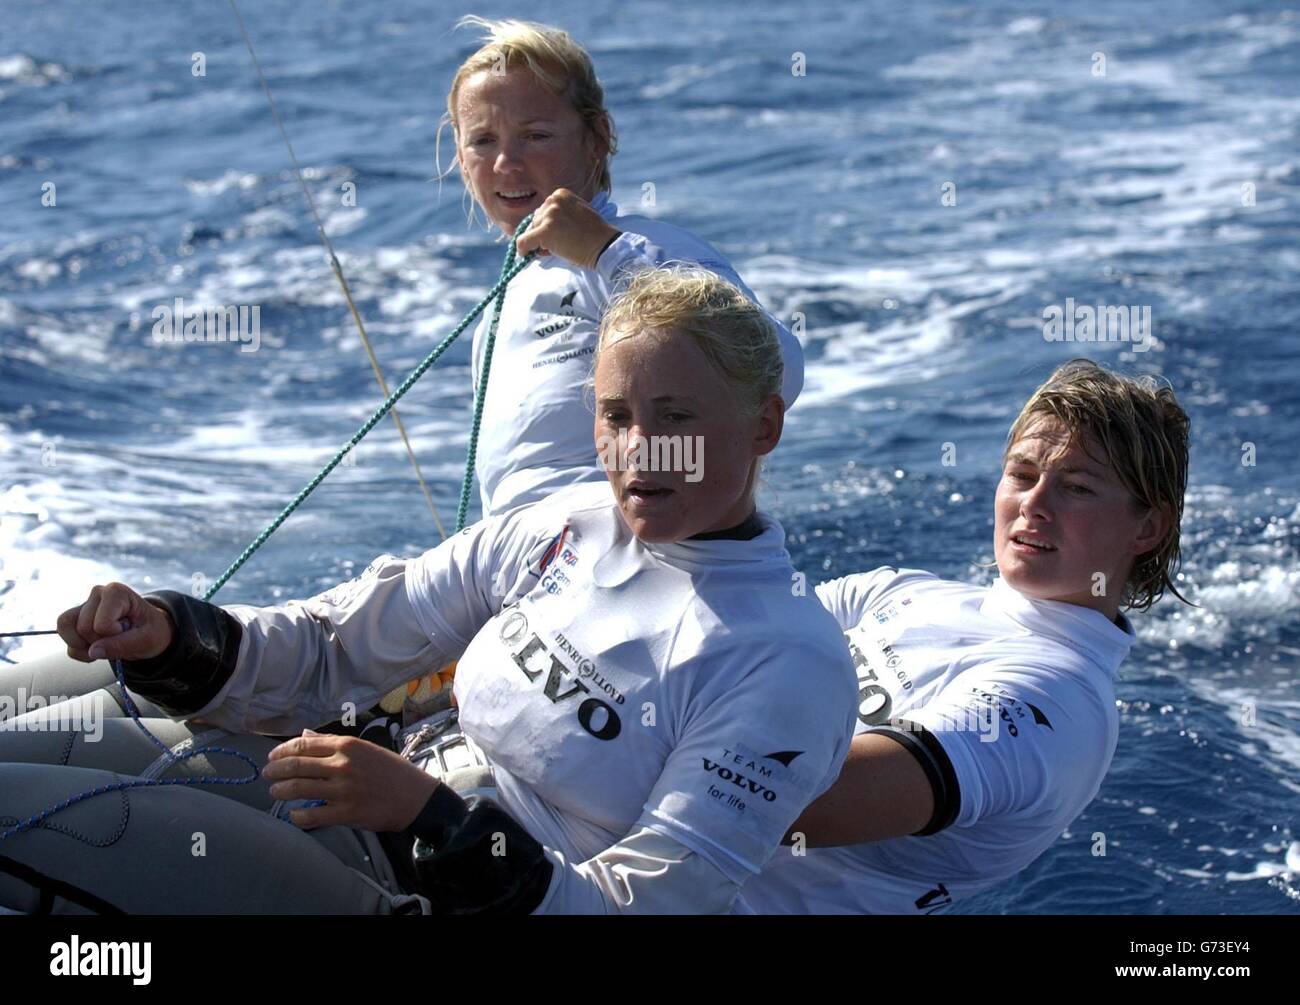 From left, Shirley Robertson, Sarah Ayton and Sarah Webb on the water during the Royal Yachting Association's Olympic team preview day at their base in Athens, Greece. The trio will compete in the Yngling class at the Athens 2004 Olympics as part of the Great Britain sailing team. Stock Photo